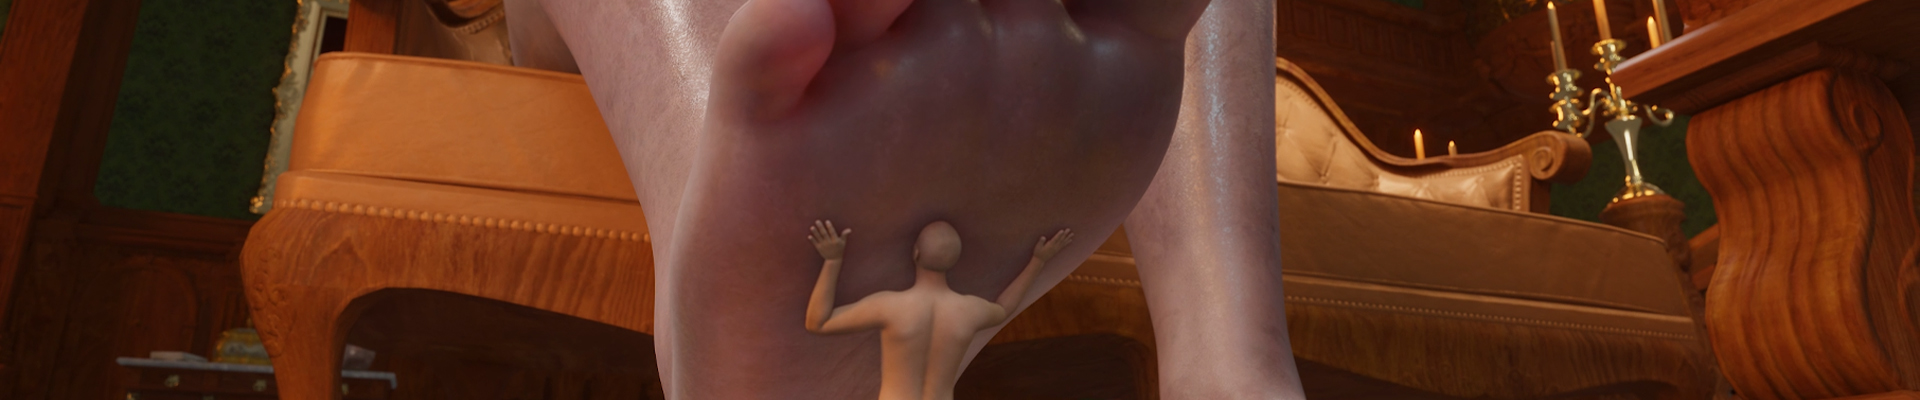 FoFe3D Giantess and Foot Fetish Animations